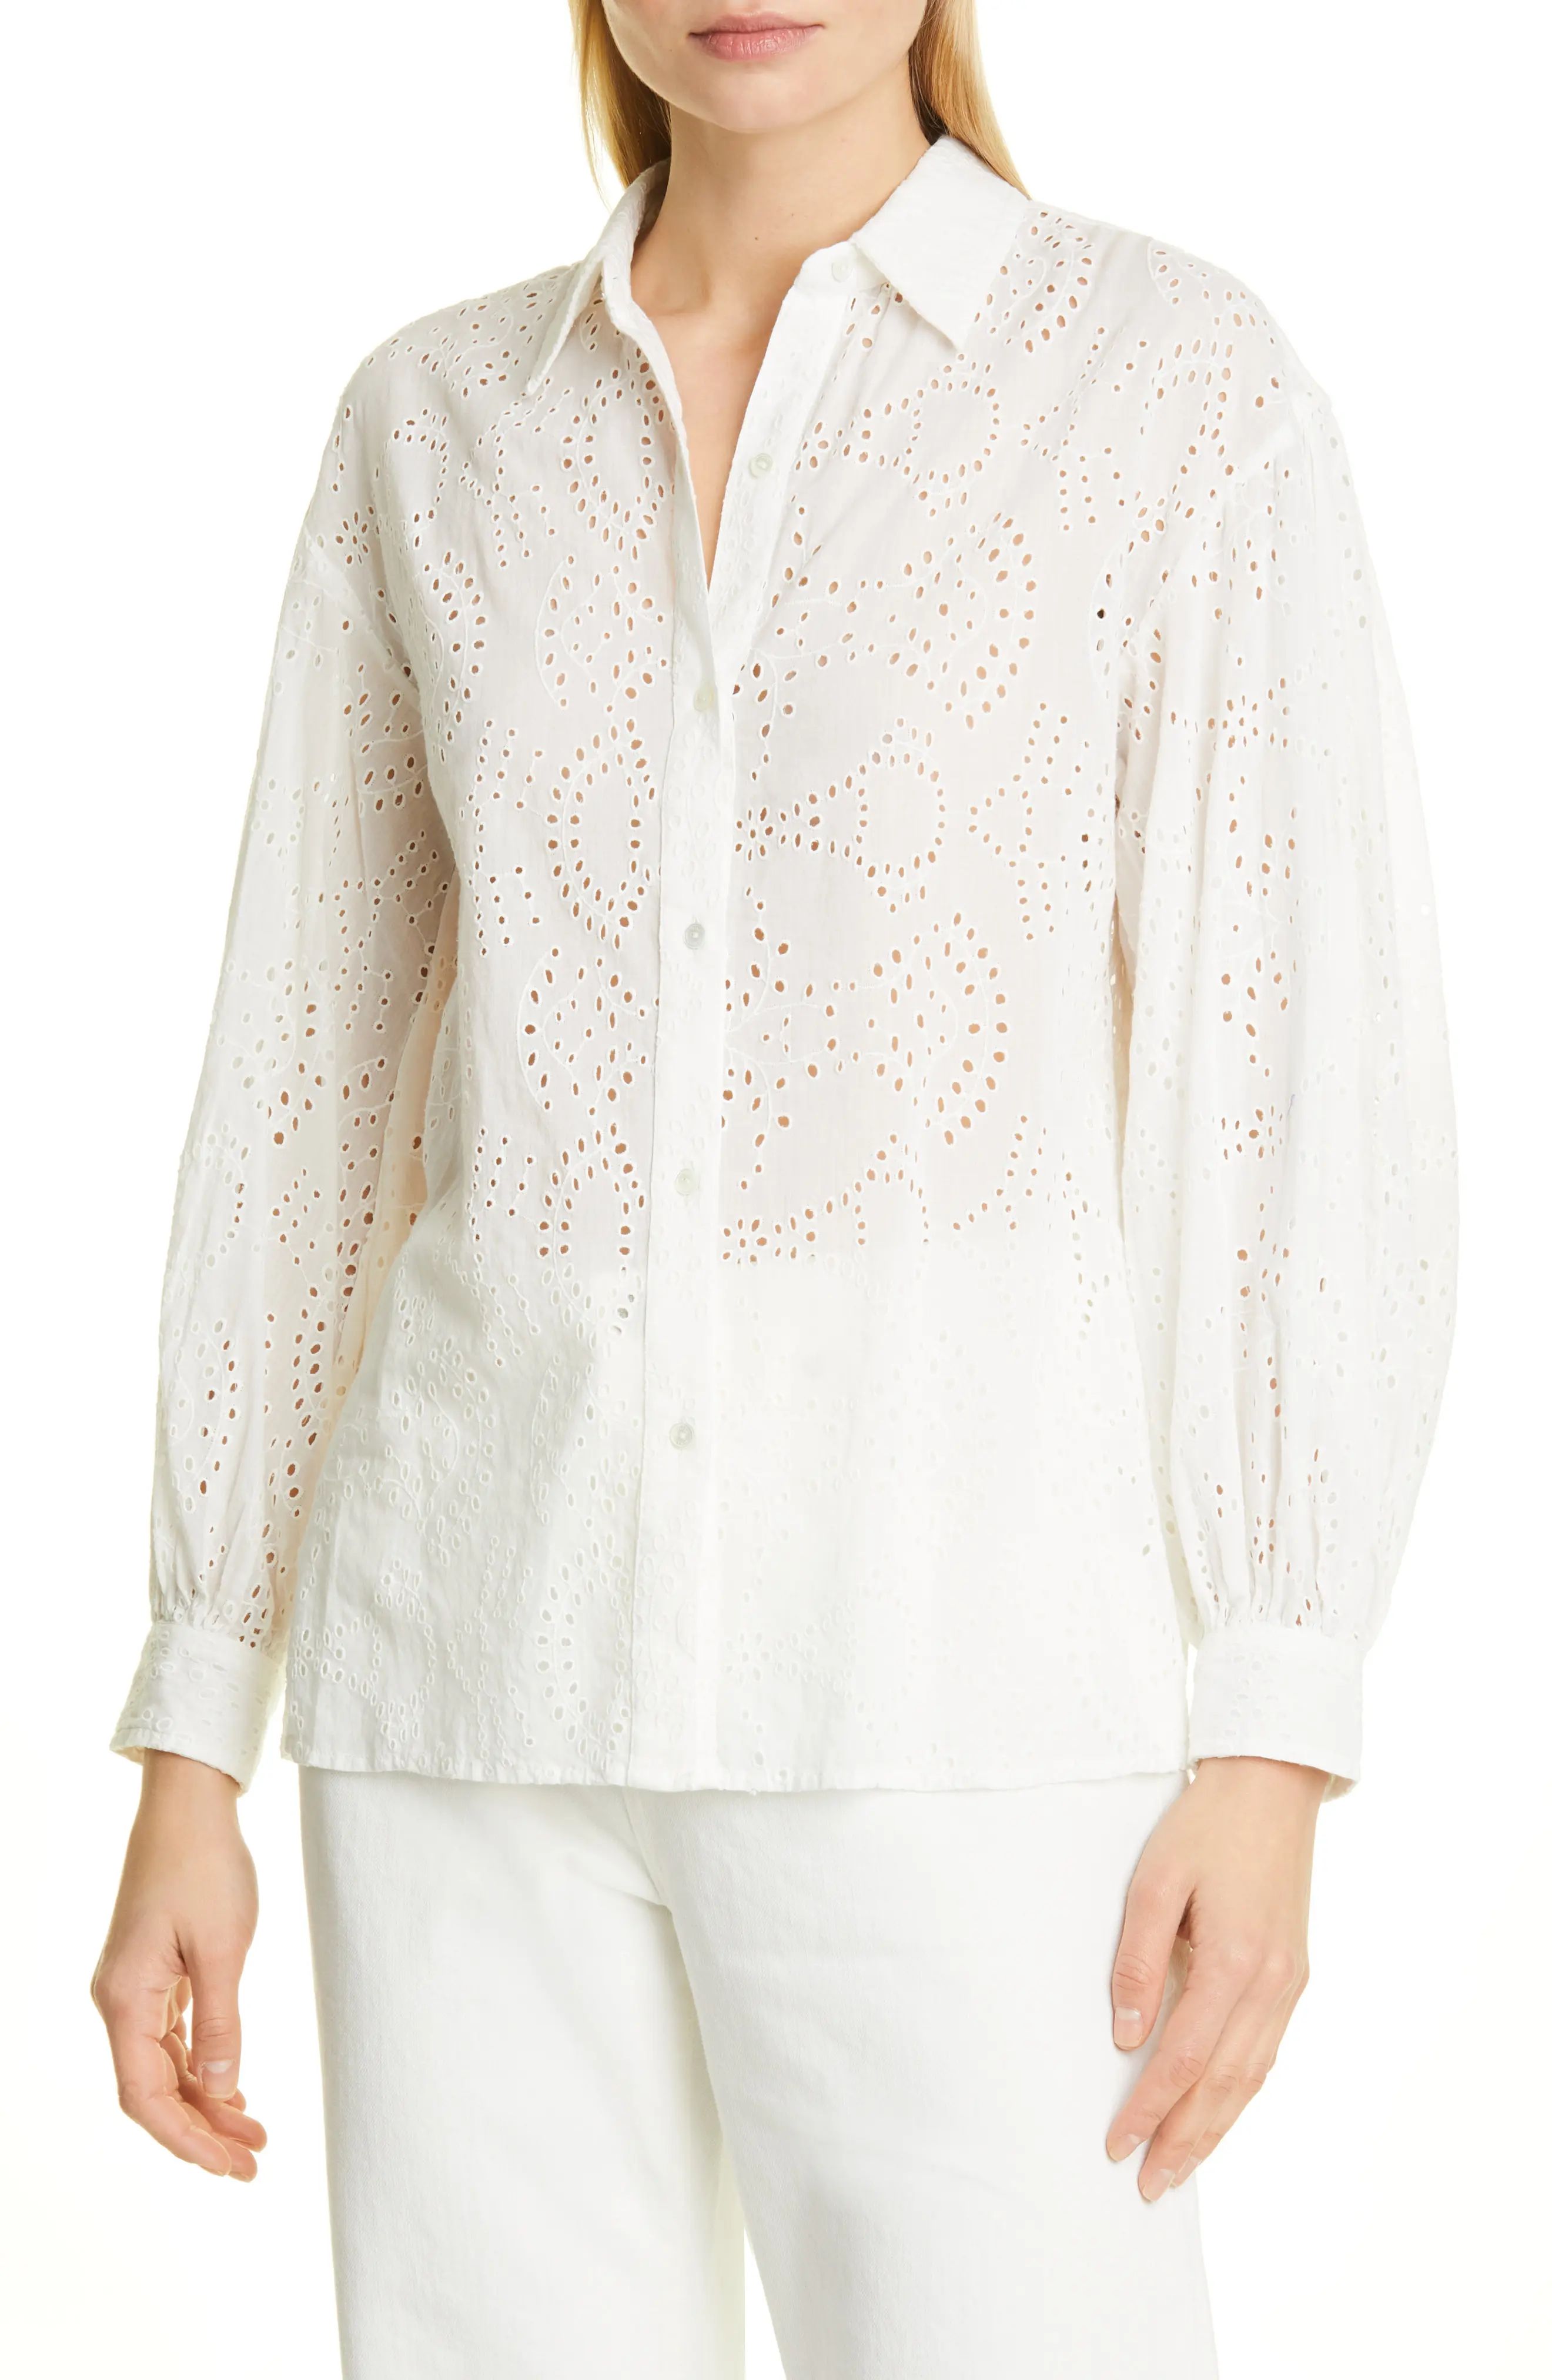 Nili Lotan Andree Cotton Eyelet Button-Up Shirt in Ivory at Nordstrom, Size Small | Nordstrom